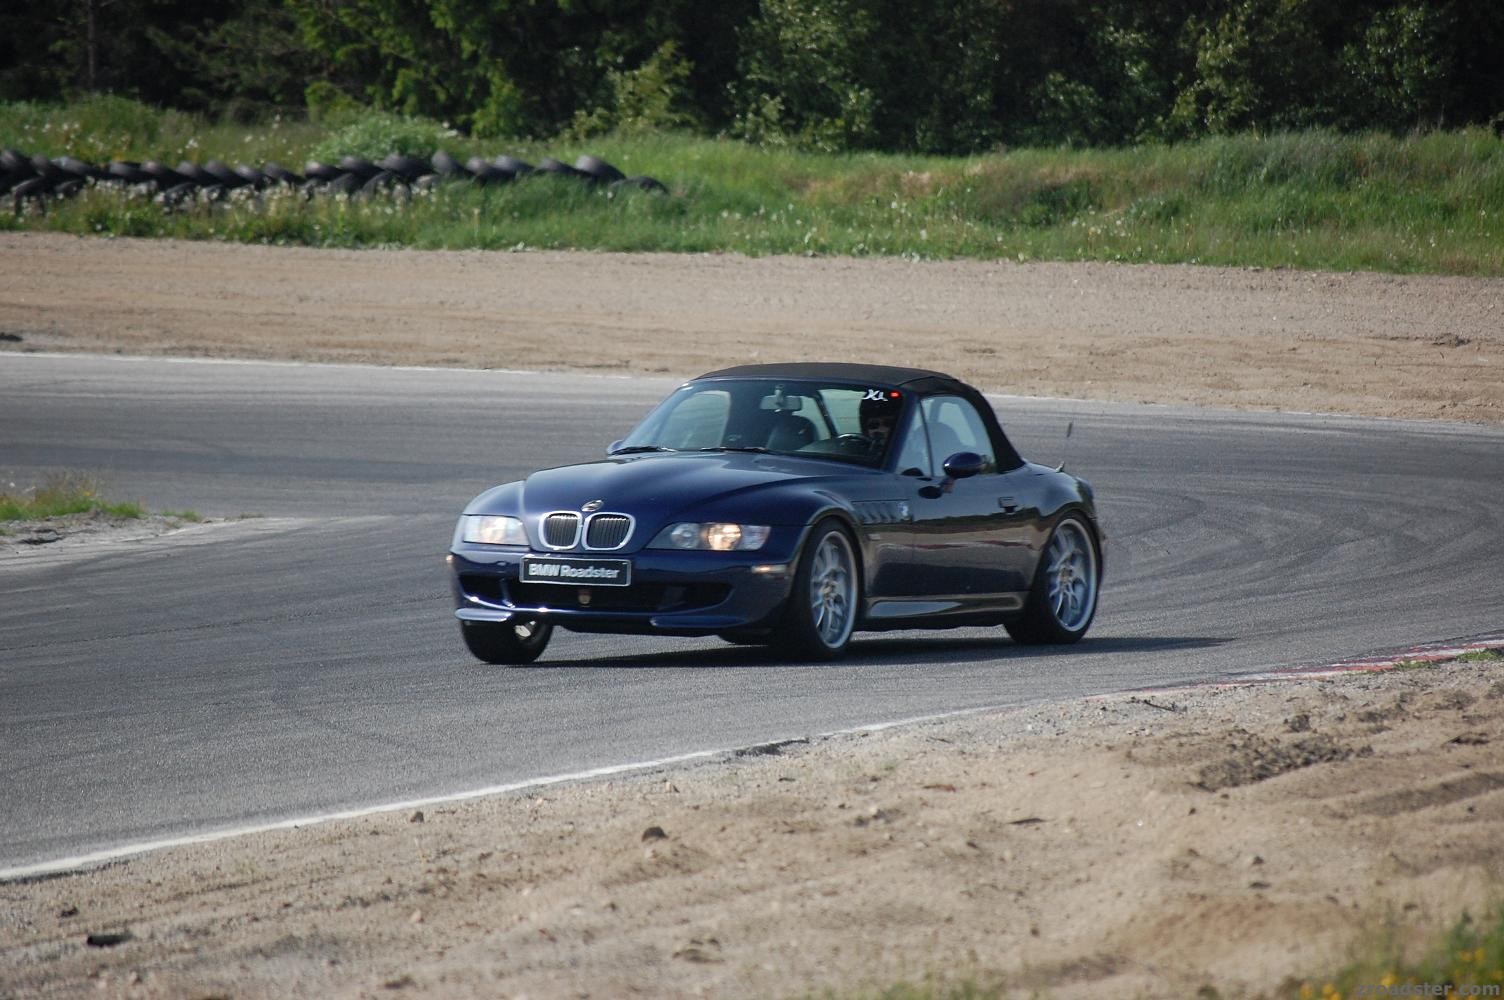 A great day with the Z3 on the race track